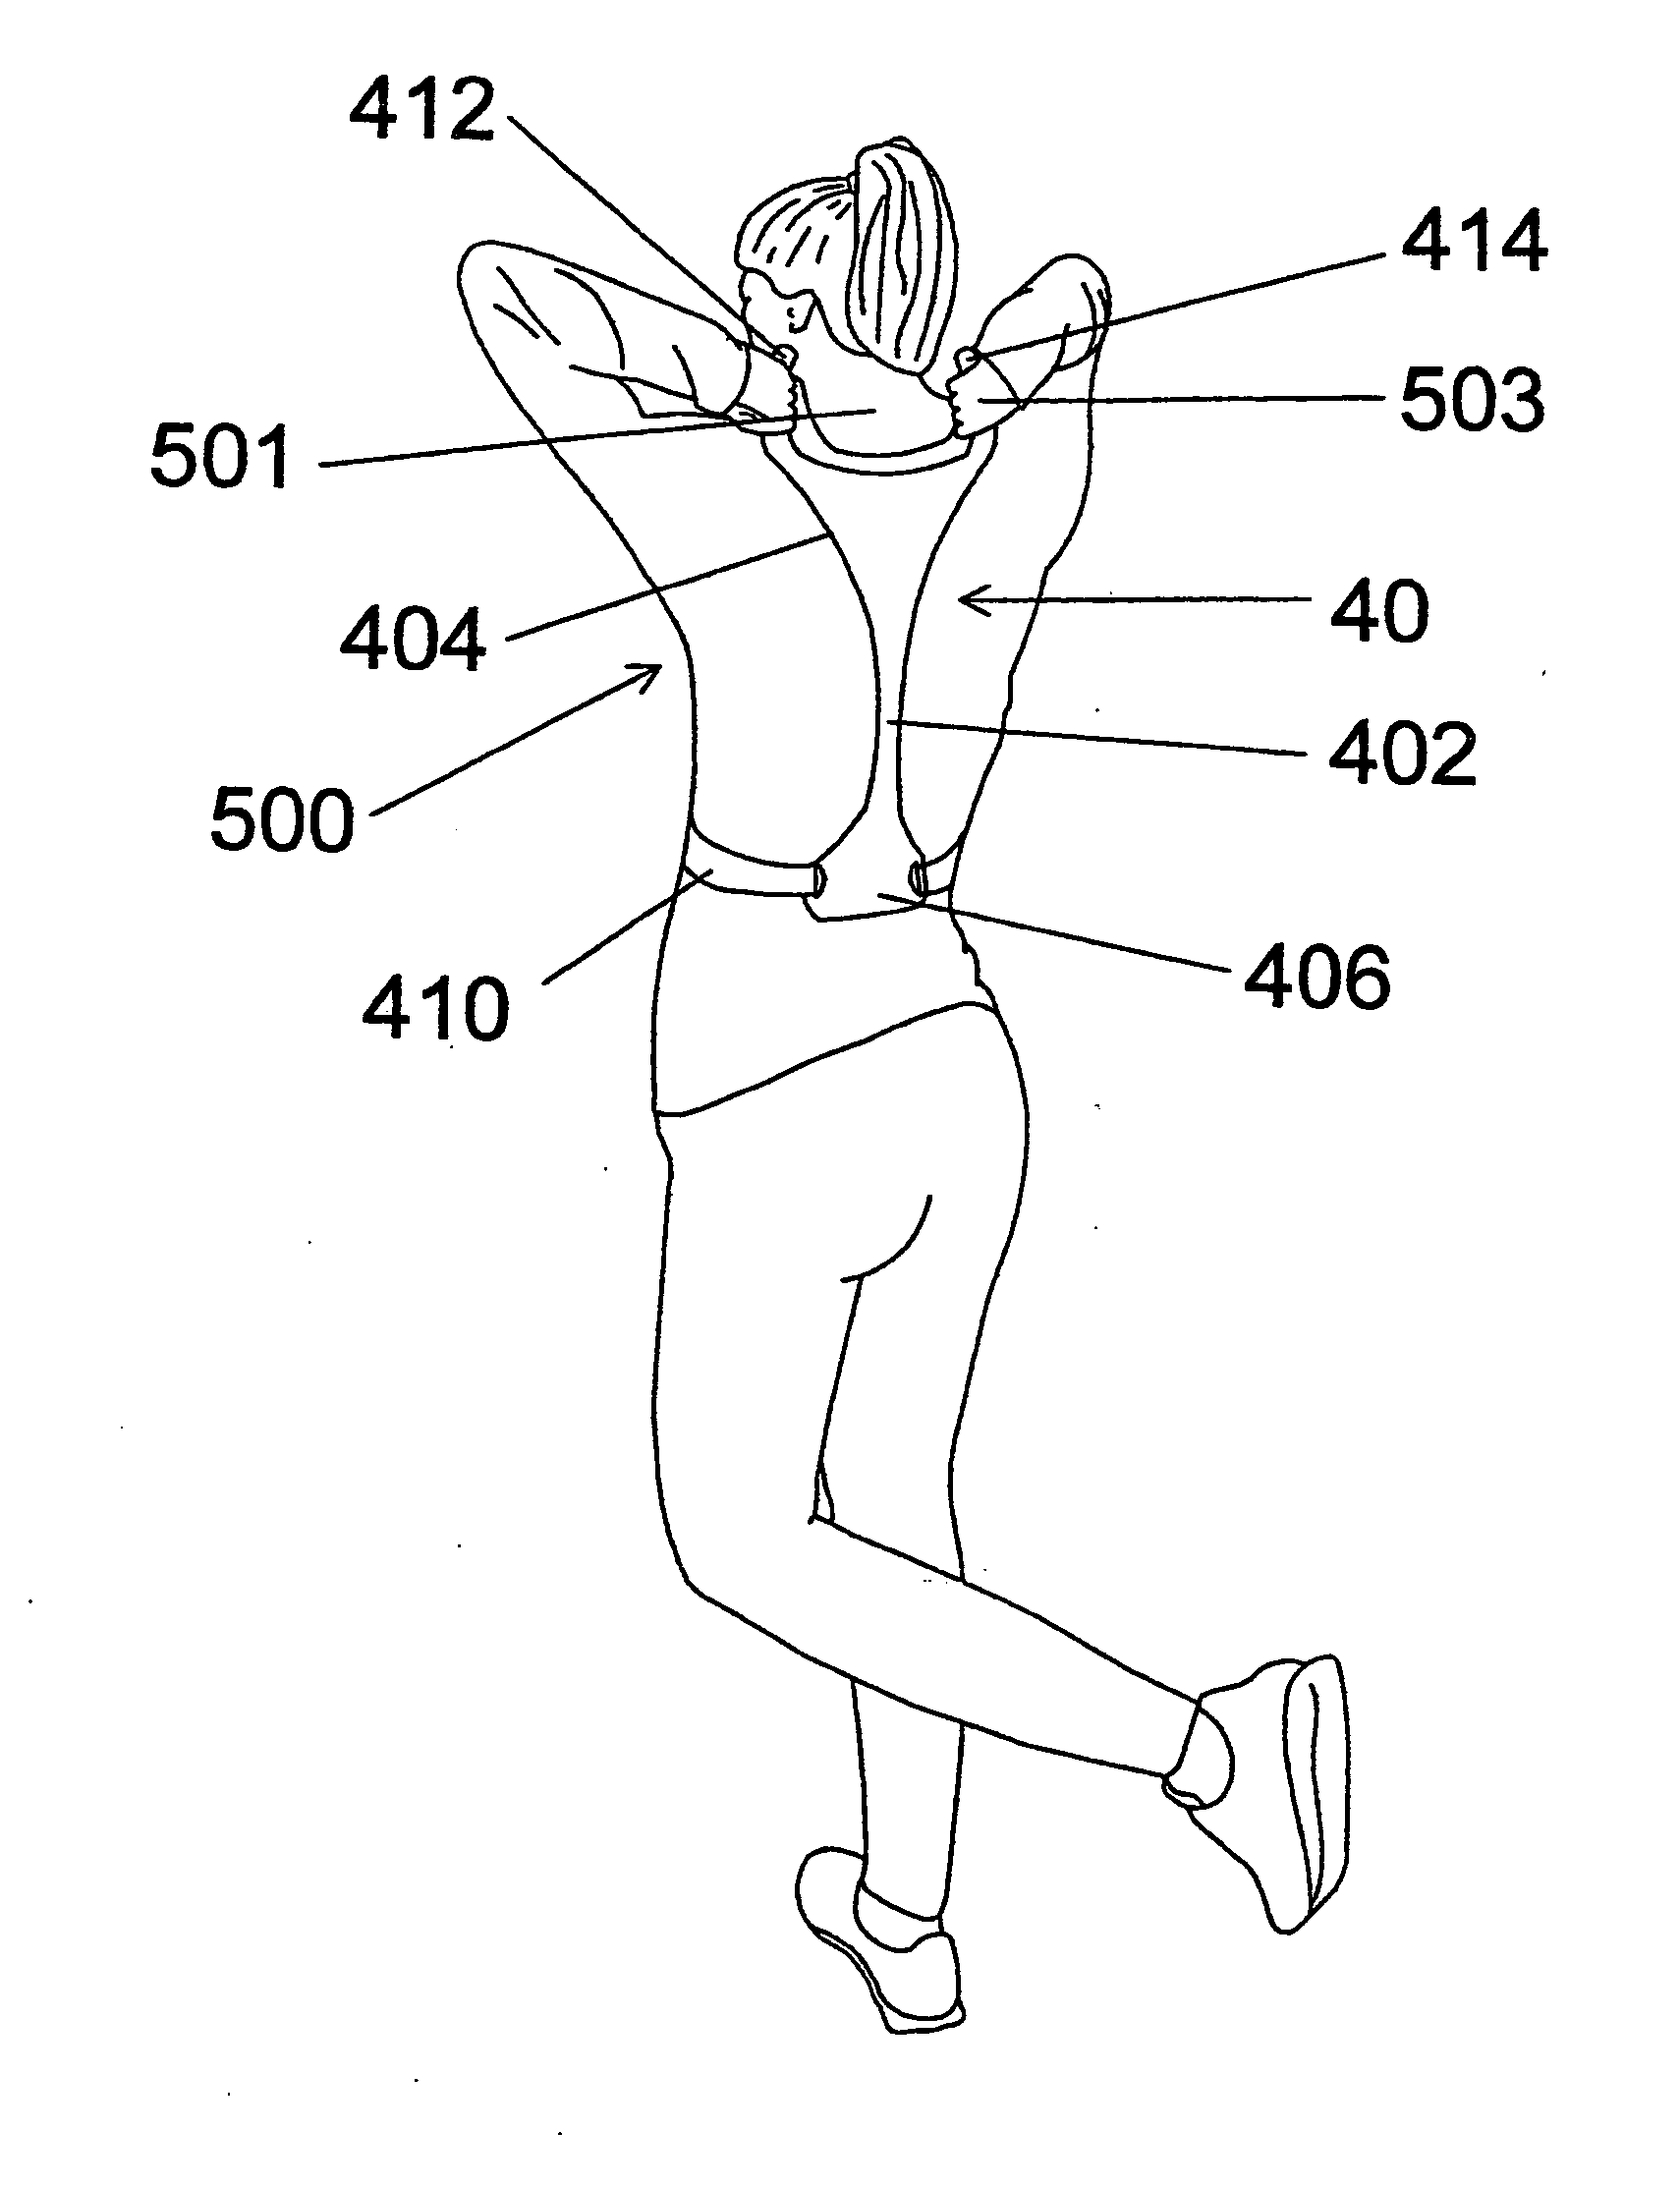 Method of increasing lung capacity for enhanced oxygen exchange using upper appendage during positioning